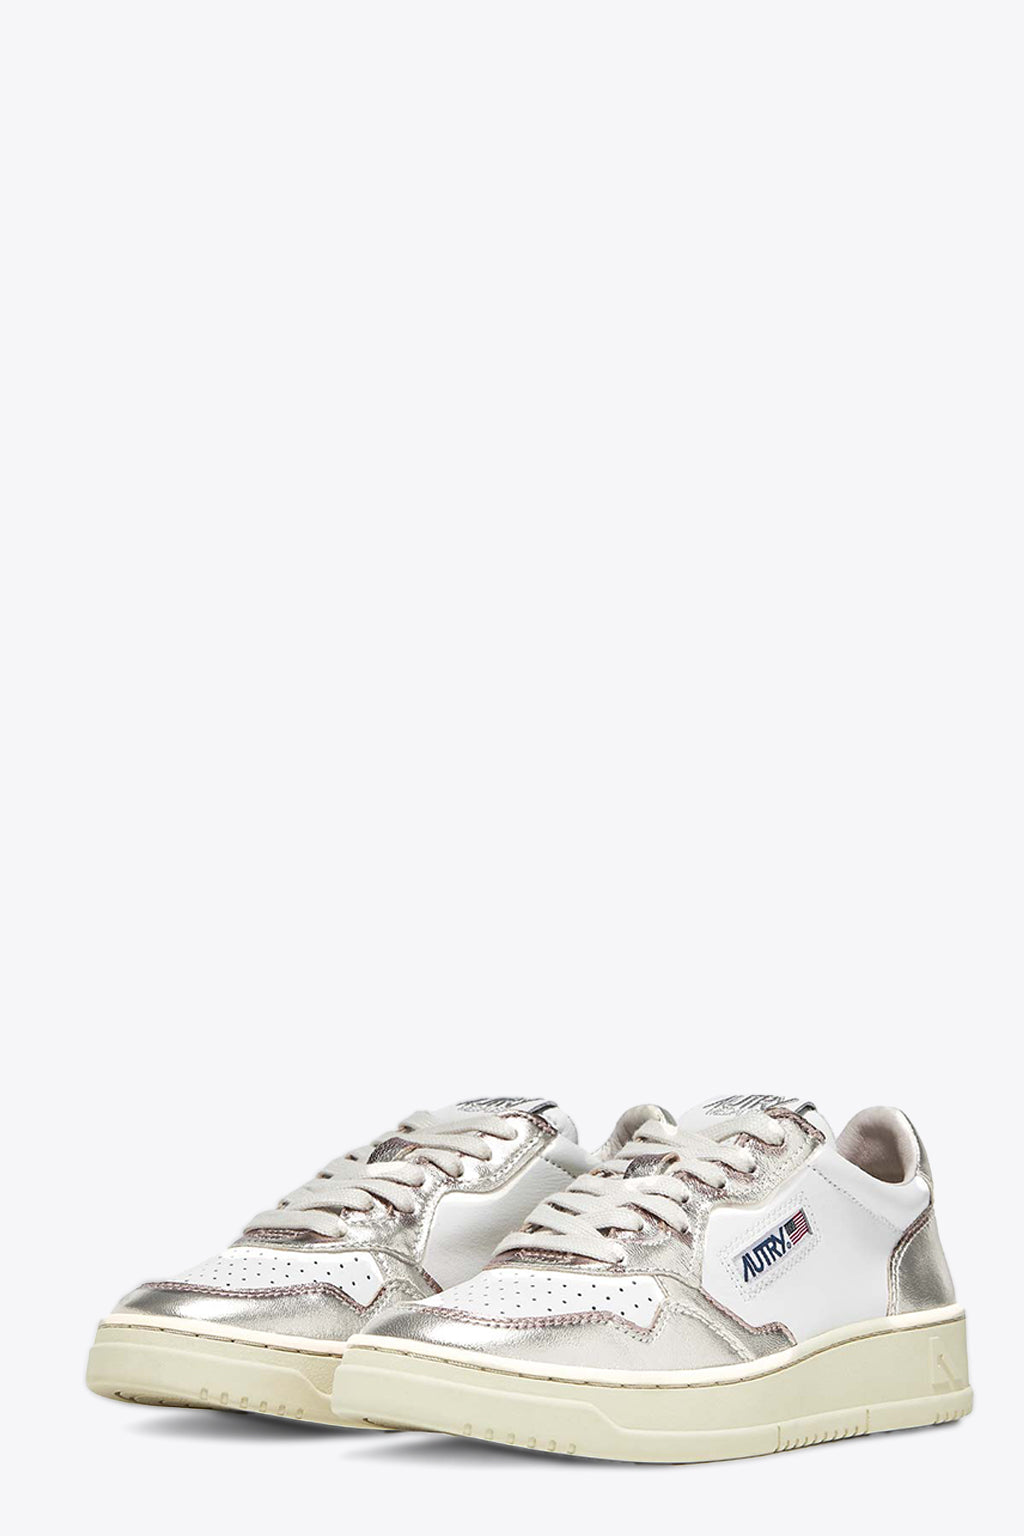 alt-image__White-and-silver-leather-low-sneaker---Medalist